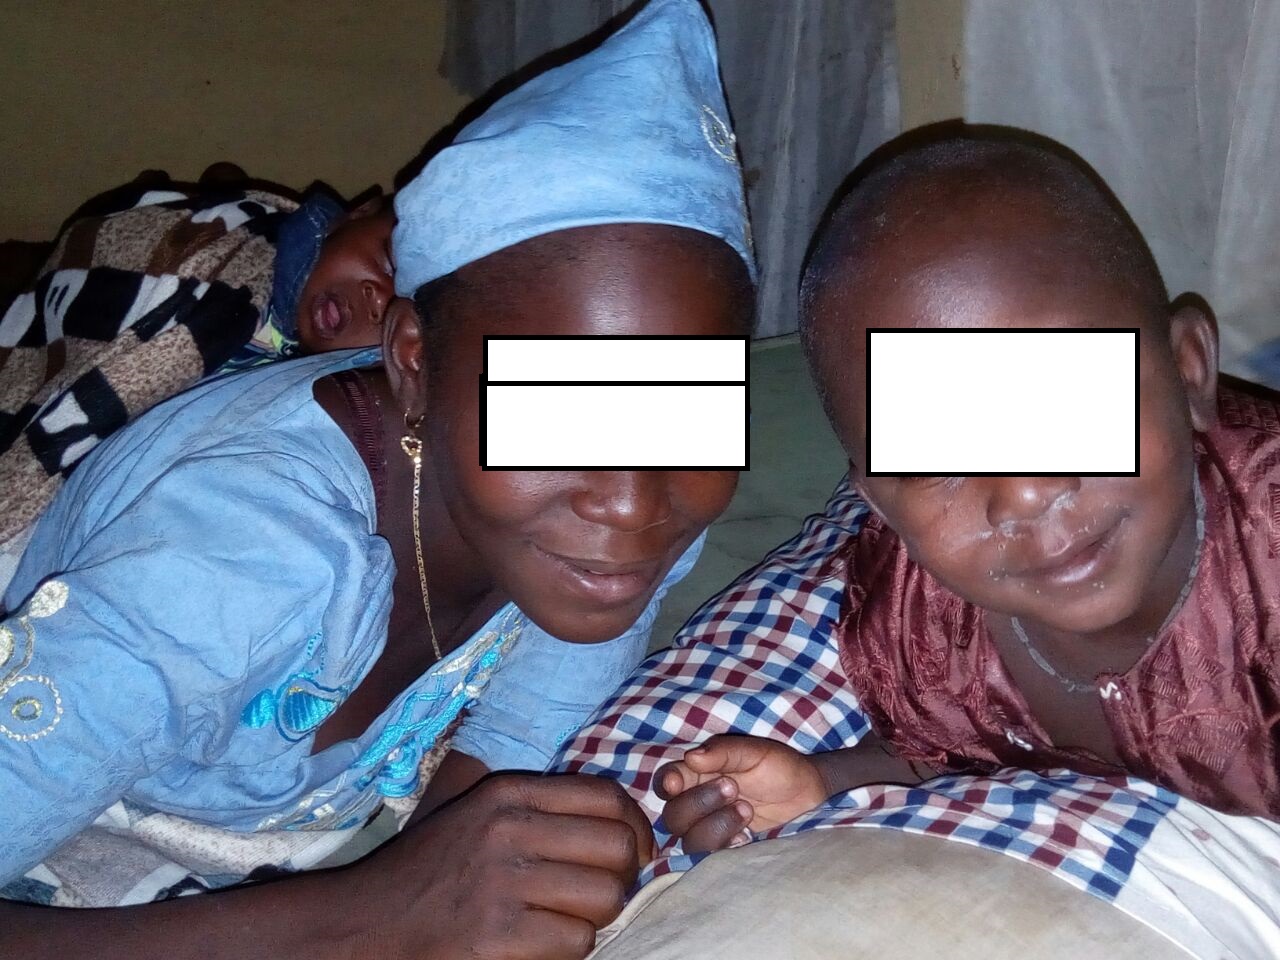 Faces distorted to protect the identity of the mother and the son who is underage.